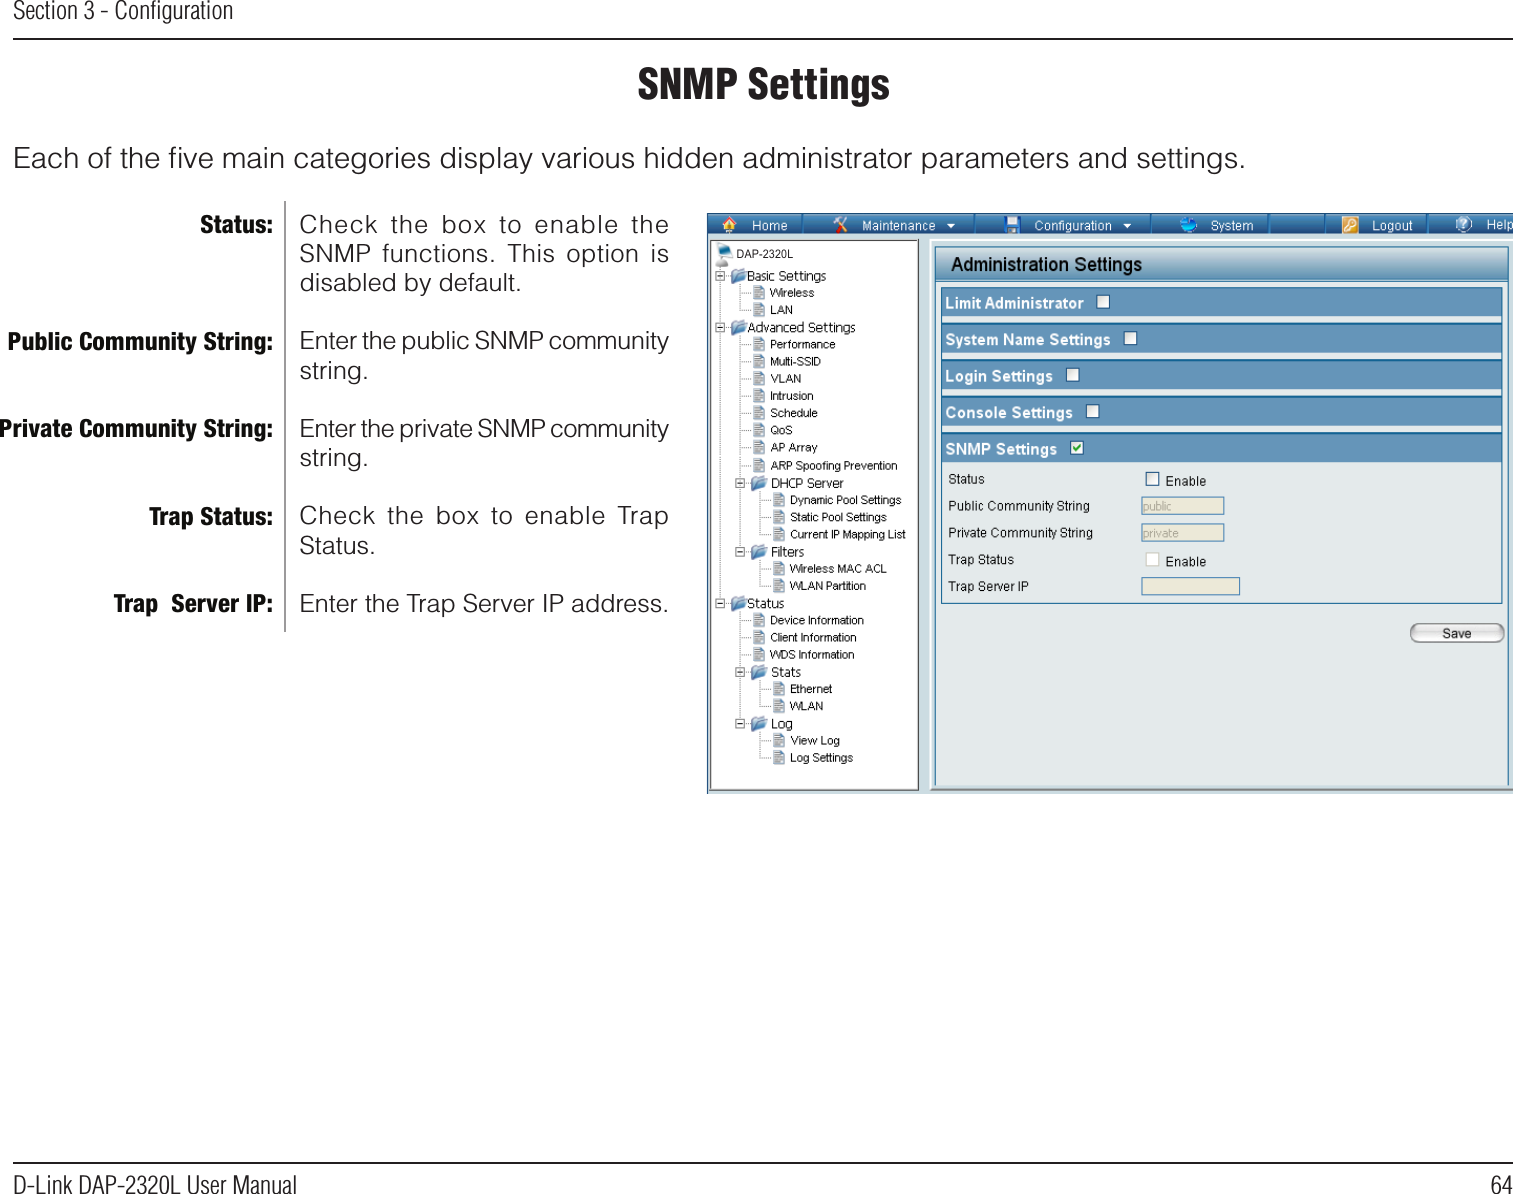 64D-Link DAP-2320L User ManualSection 3 - ConﬁgurationSNMP SettingsEach of the ﬁve main categories display various hidden administrator parameters and settings.Check  the  box  to  enable  the SNMP  functions.  This  option  is disabled by default.Enter the public SNMP community string.Enter the private SNMP community string.Check  the  box  to  enable  Trap Status.Enter the Trap Server IP address.Status:Public Community String:Private Community String:Trap Status:Trap  Server IP:DAP-2320L